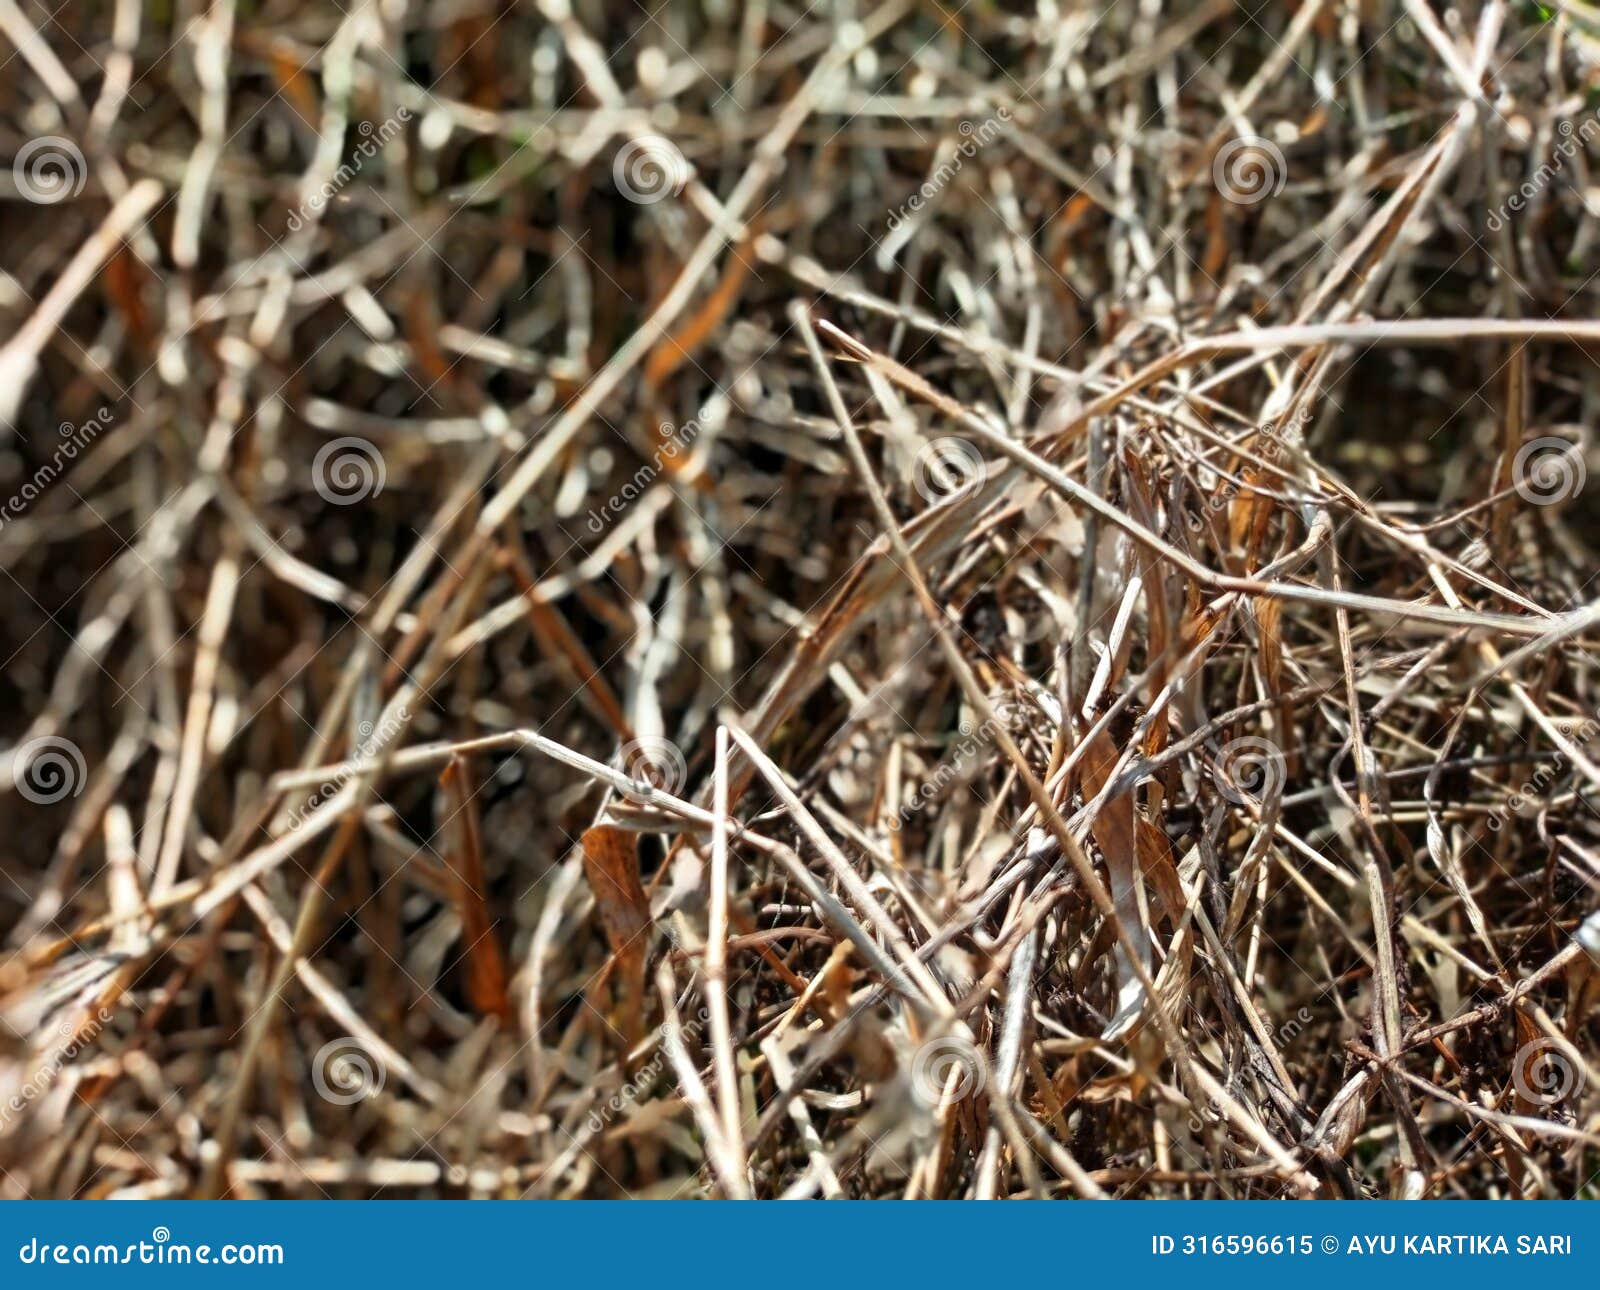 wild grass dries up and dies due to the dry and dry season